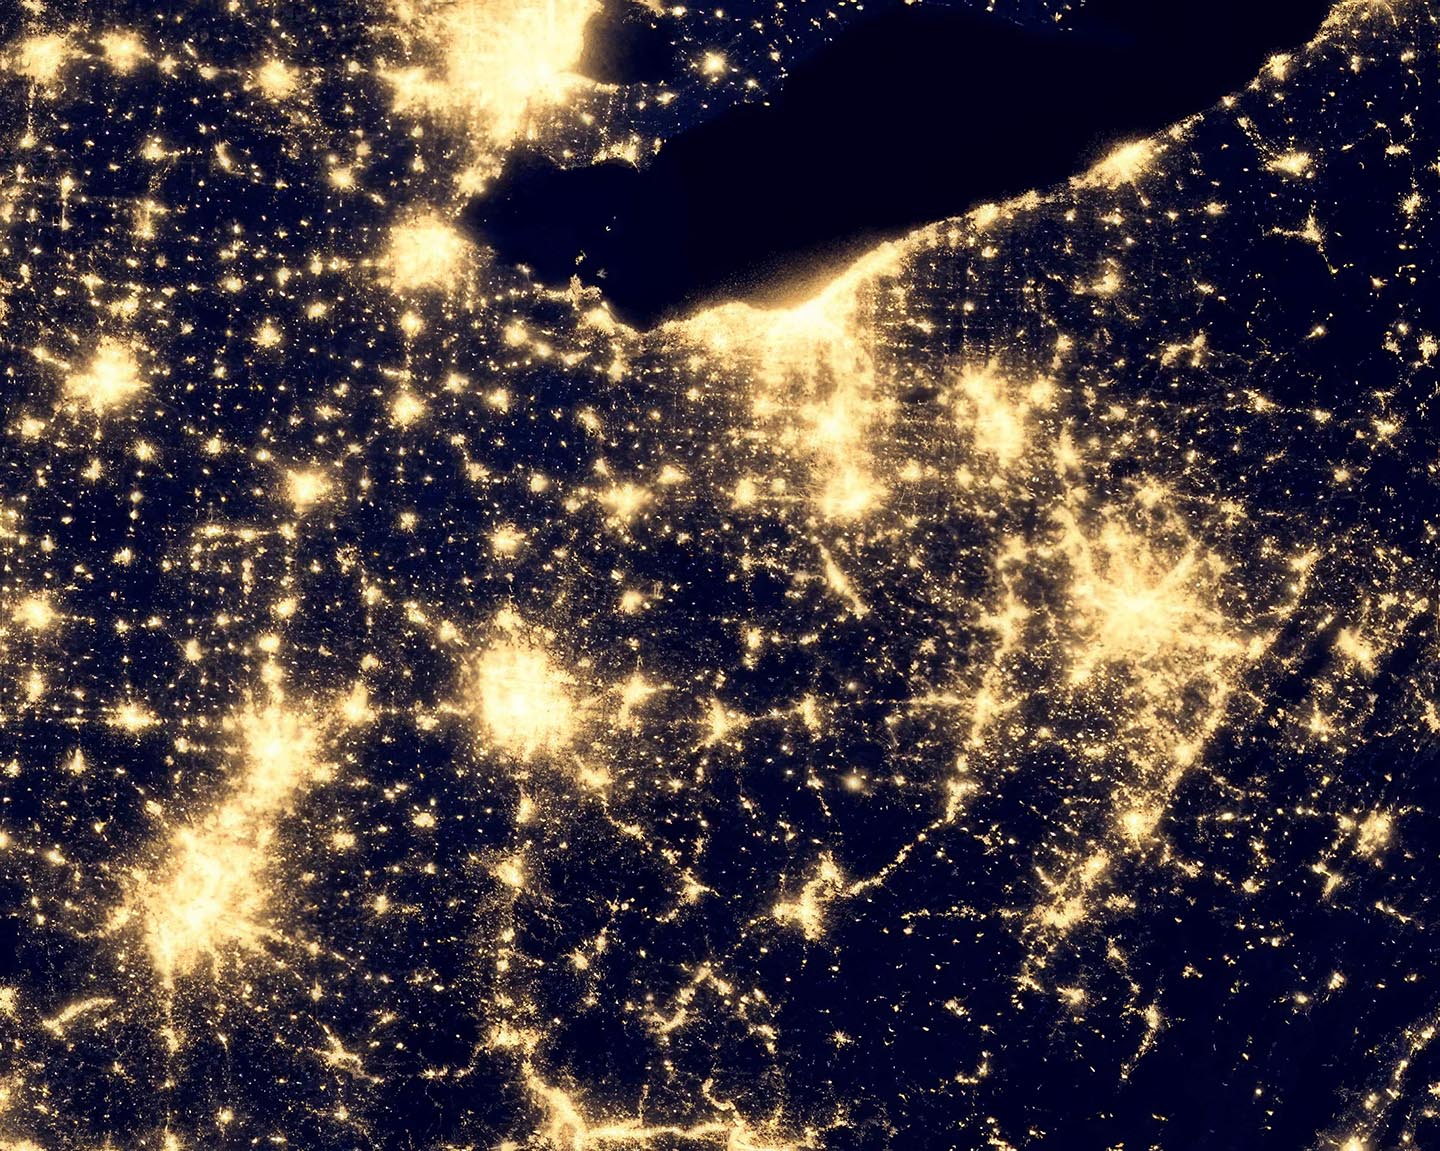 Ohio at night from space, 2012.